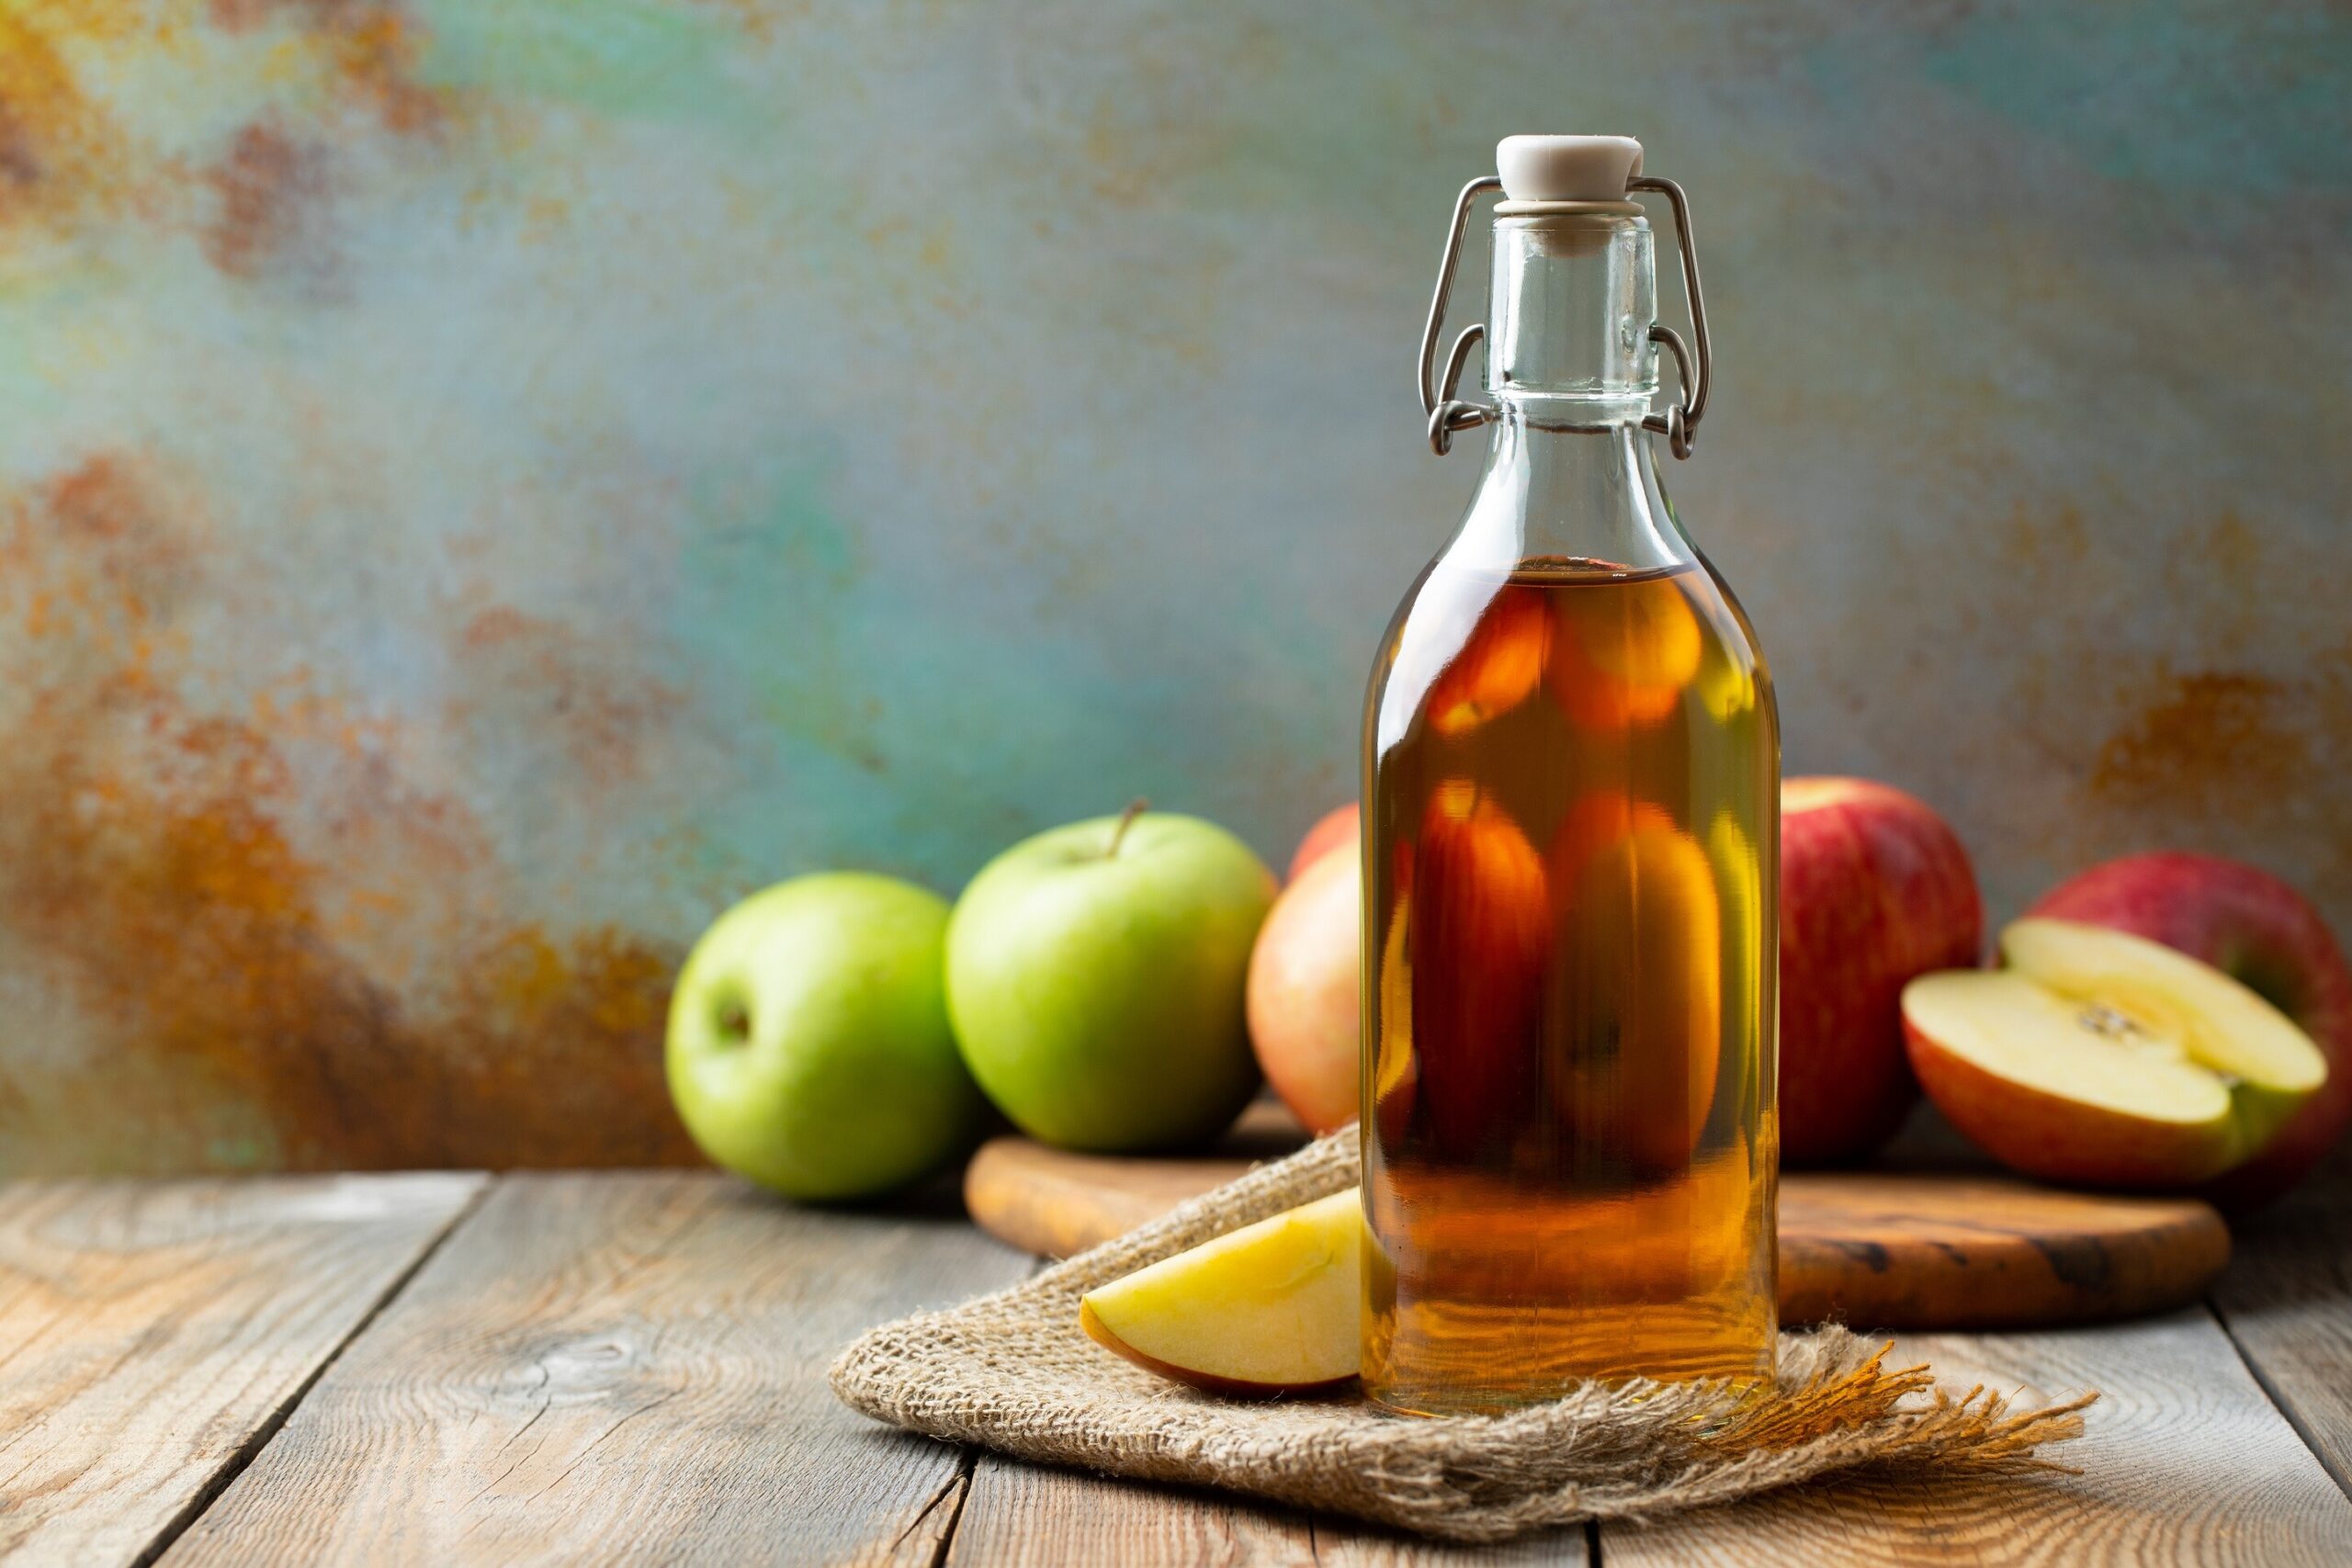 Here are 3 ways to use apple cider vinegar to care for your skin and hair